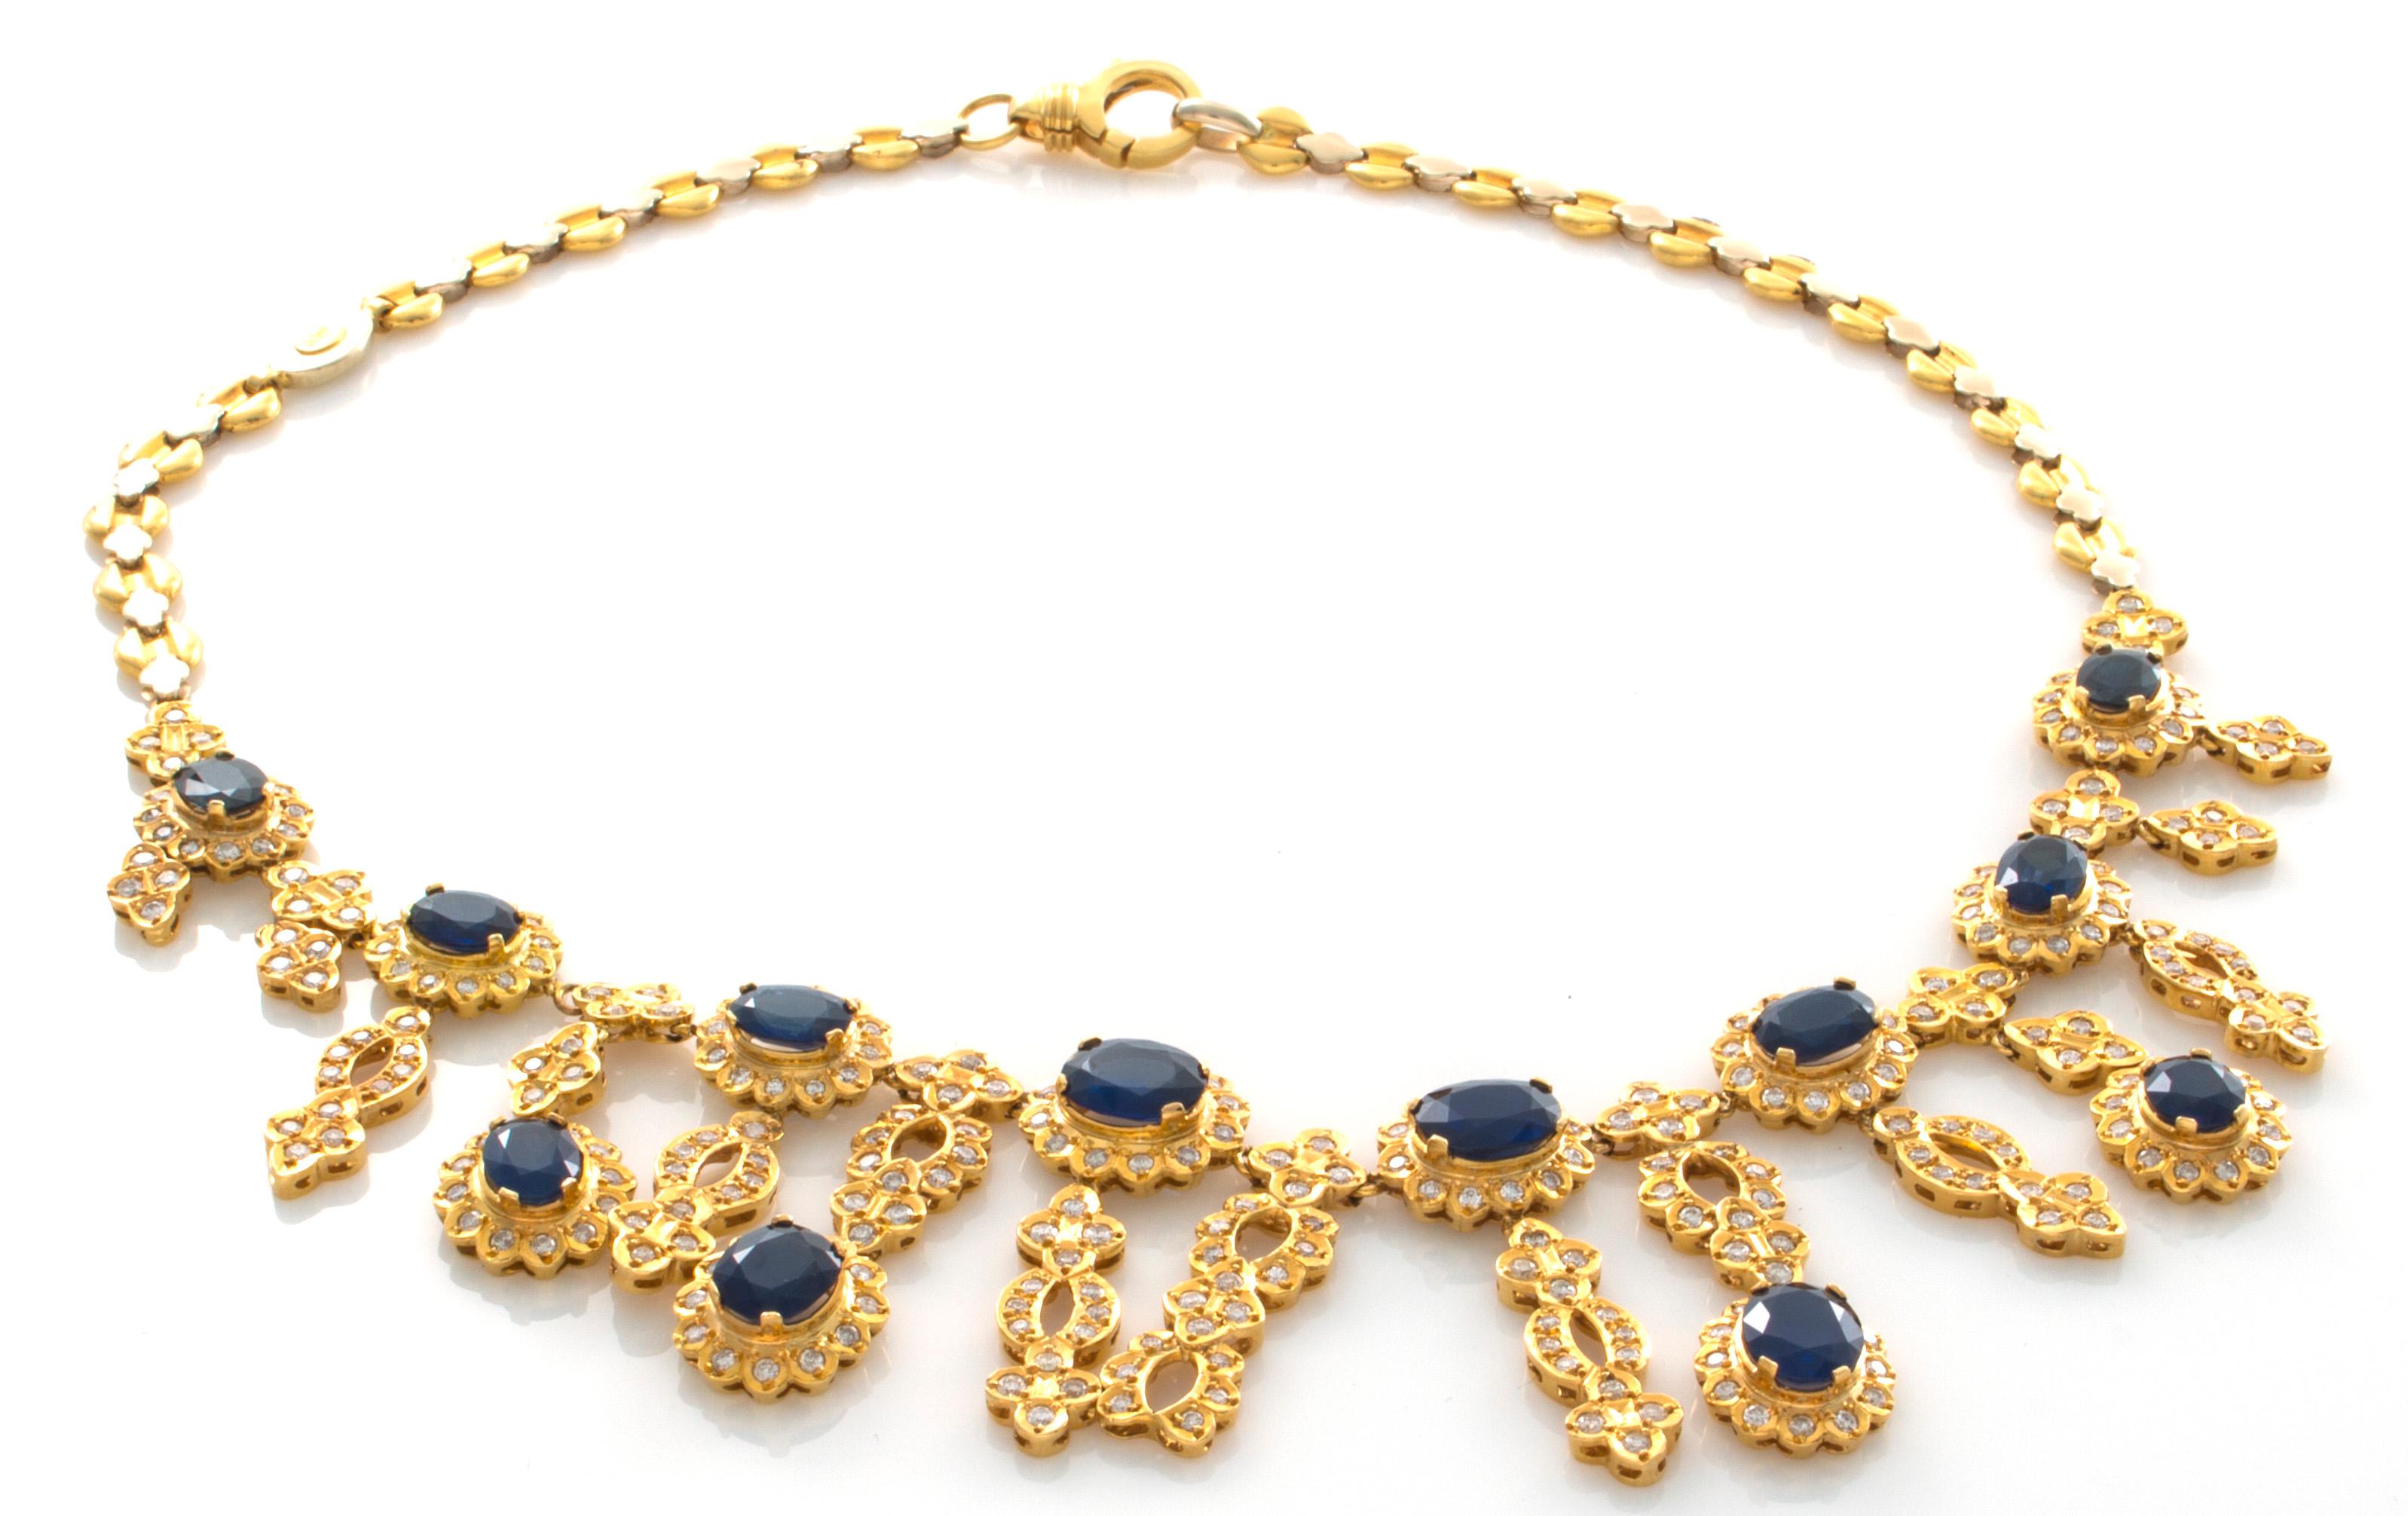 18 Karat Yellow and White Gold 30.48 Carat Sapphire and 6.80 Carat Diamond Necklace. The necklace has a bright polished finish with the front featuring a series of eight, graduated cut sapphires, each within a circular diamond frame. The clusters